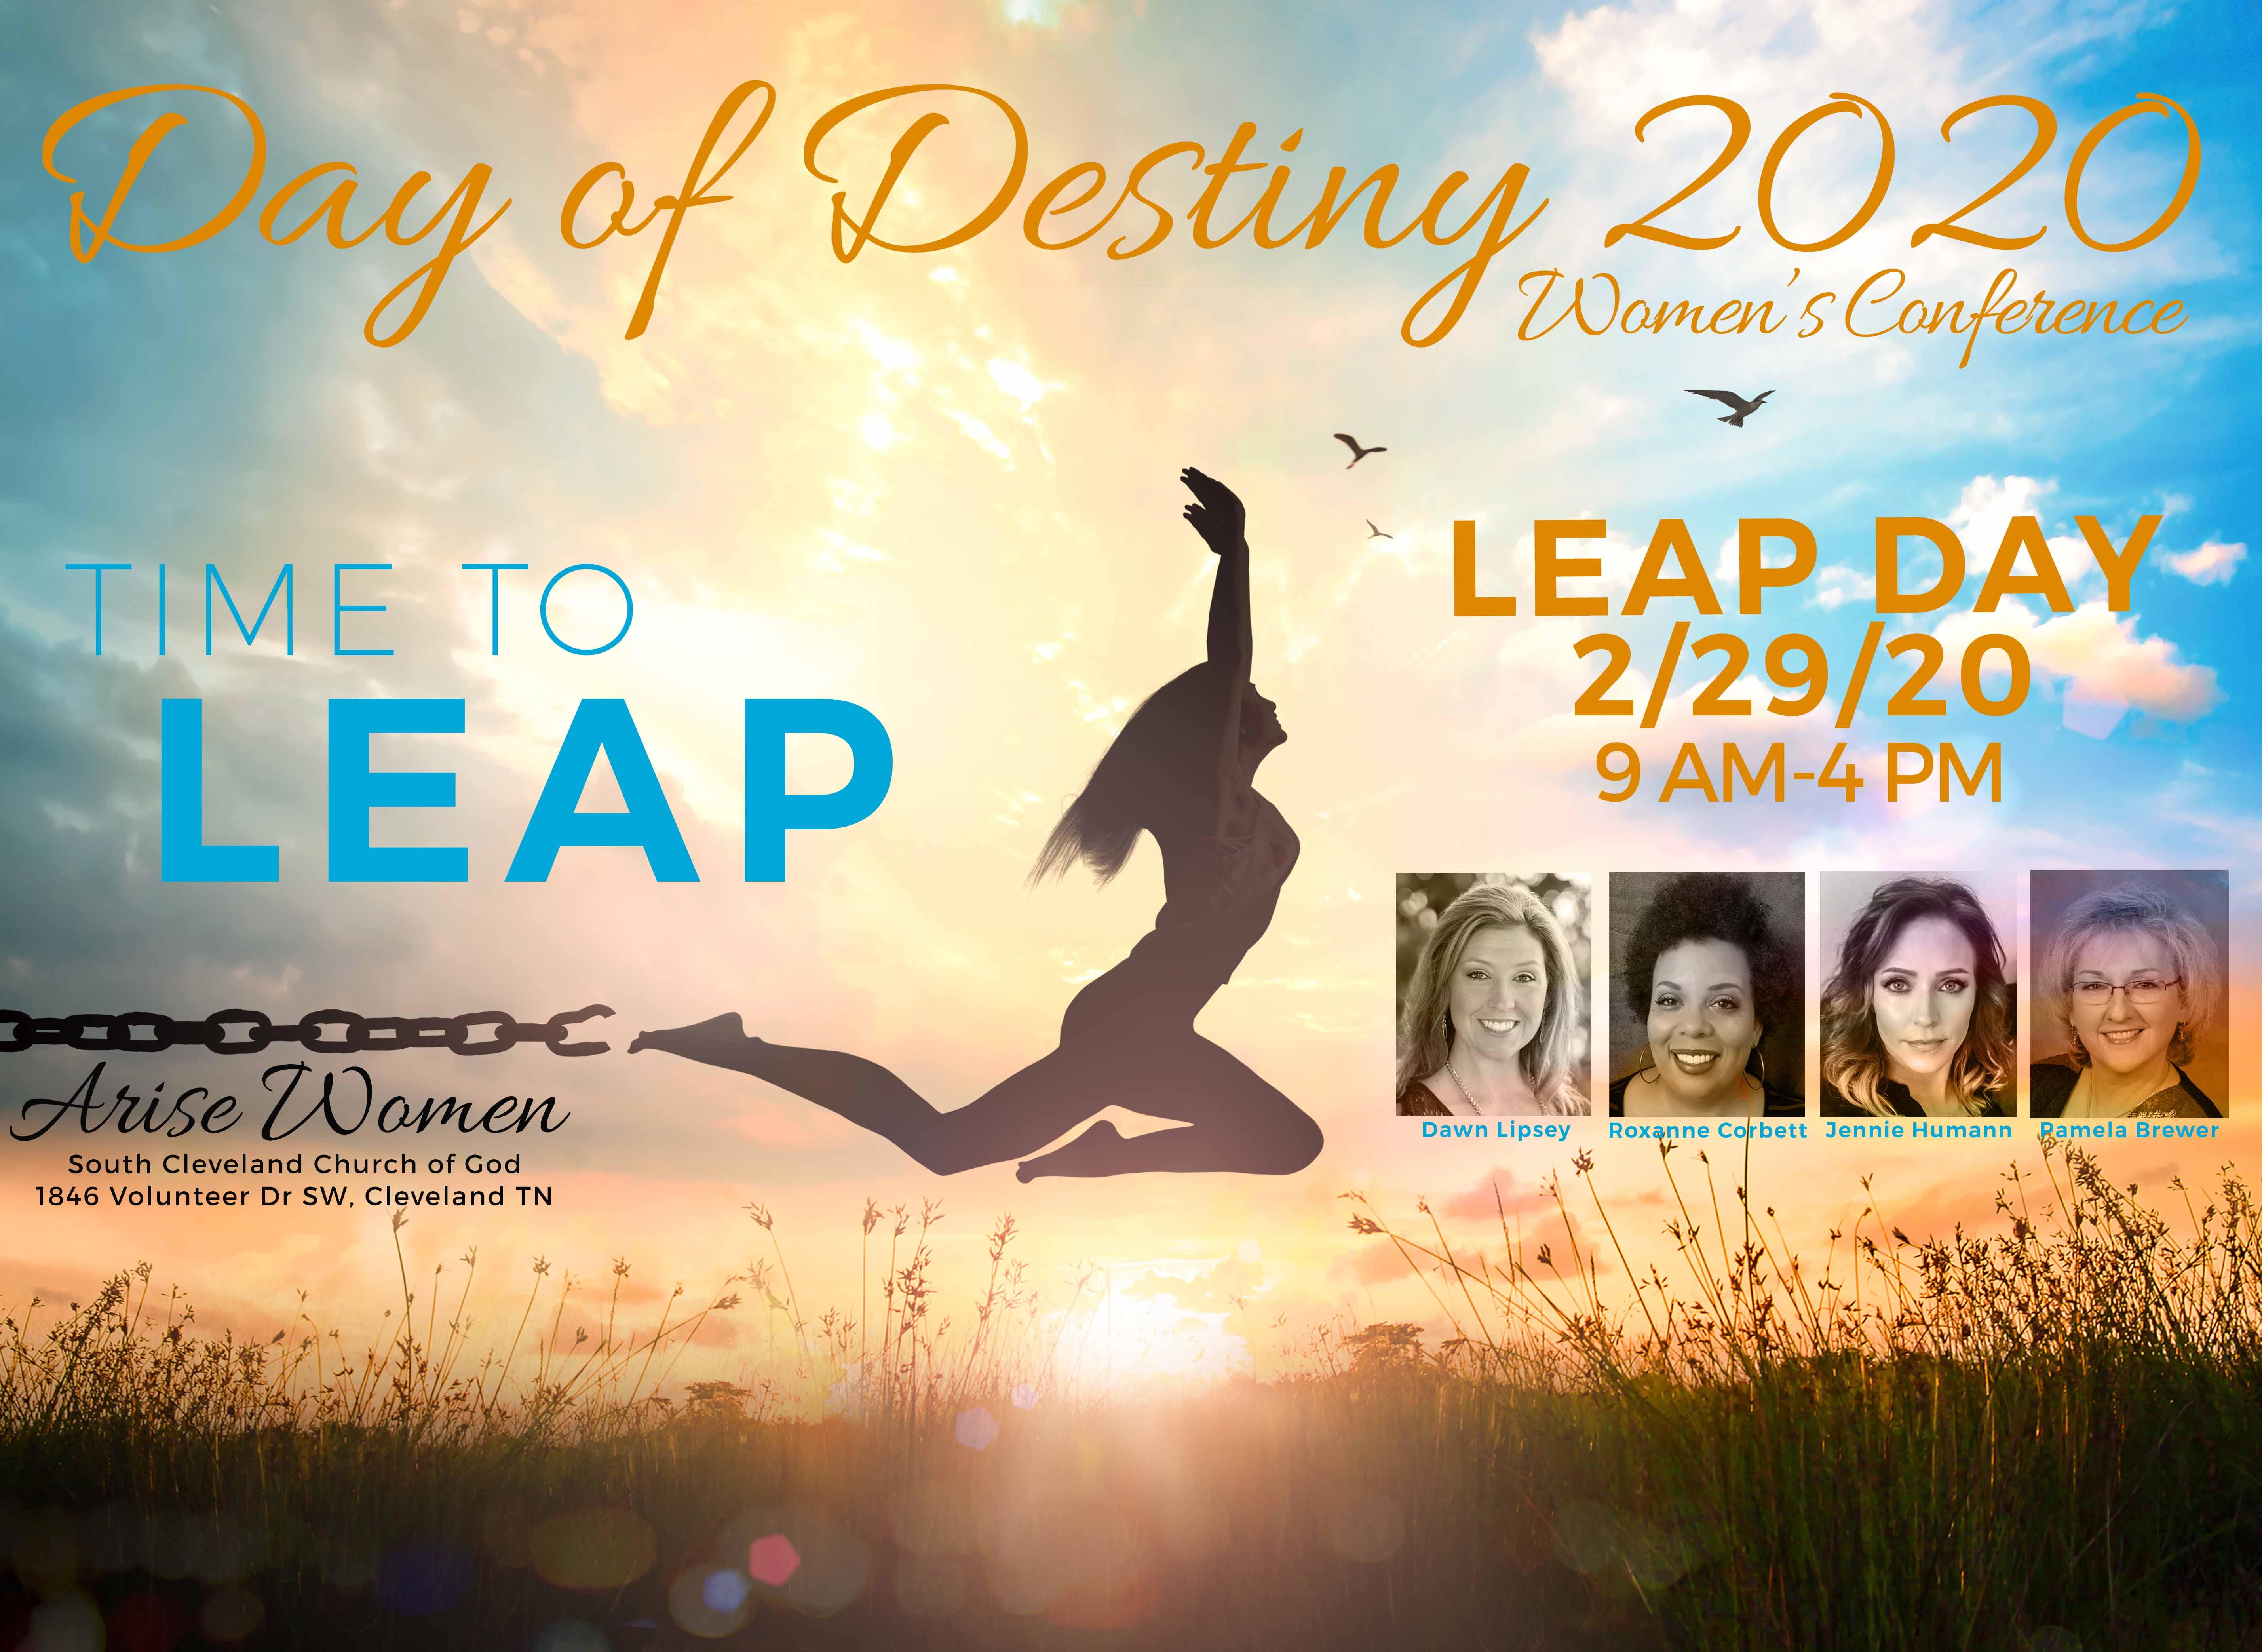 Day of Destiny 2020: Time to Leap